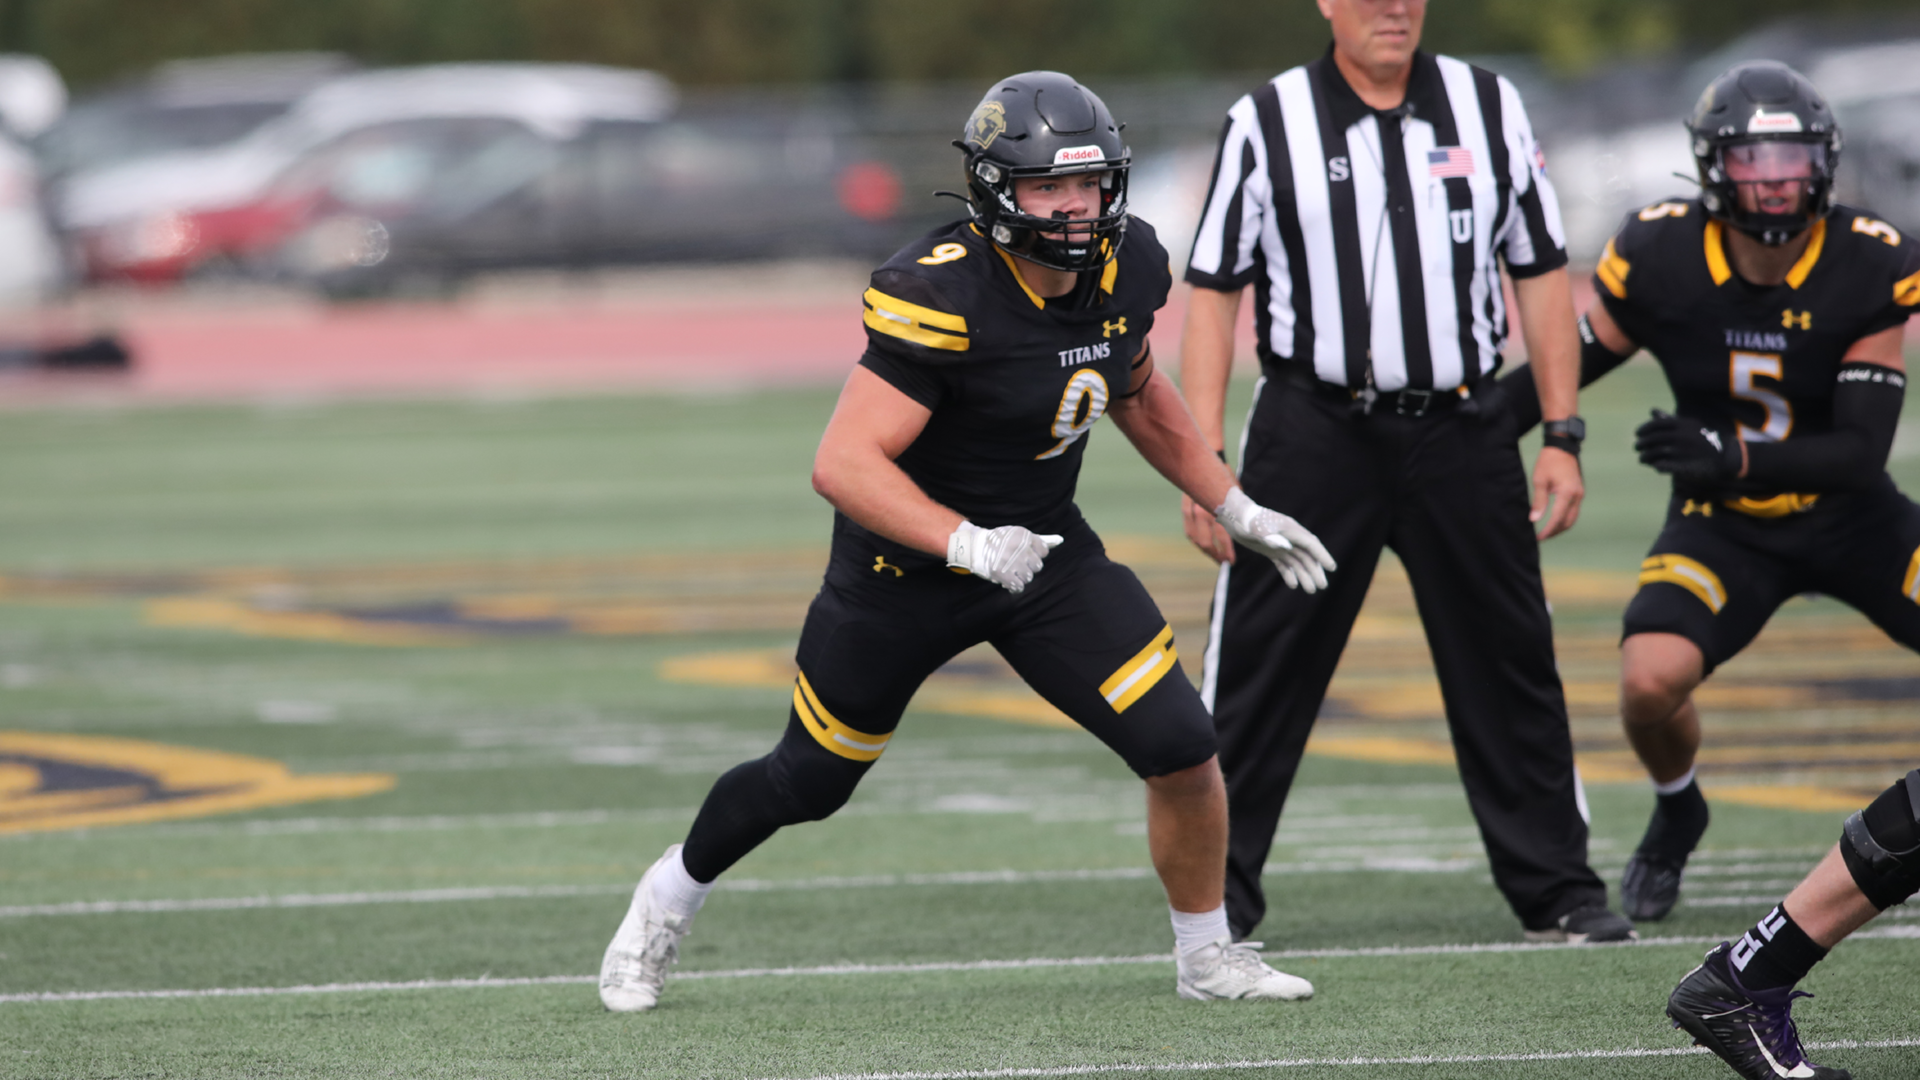 Kyle Dietzen led UW-Oshkosh with 10 tackles in the 22-7 loss to UW-Platteville